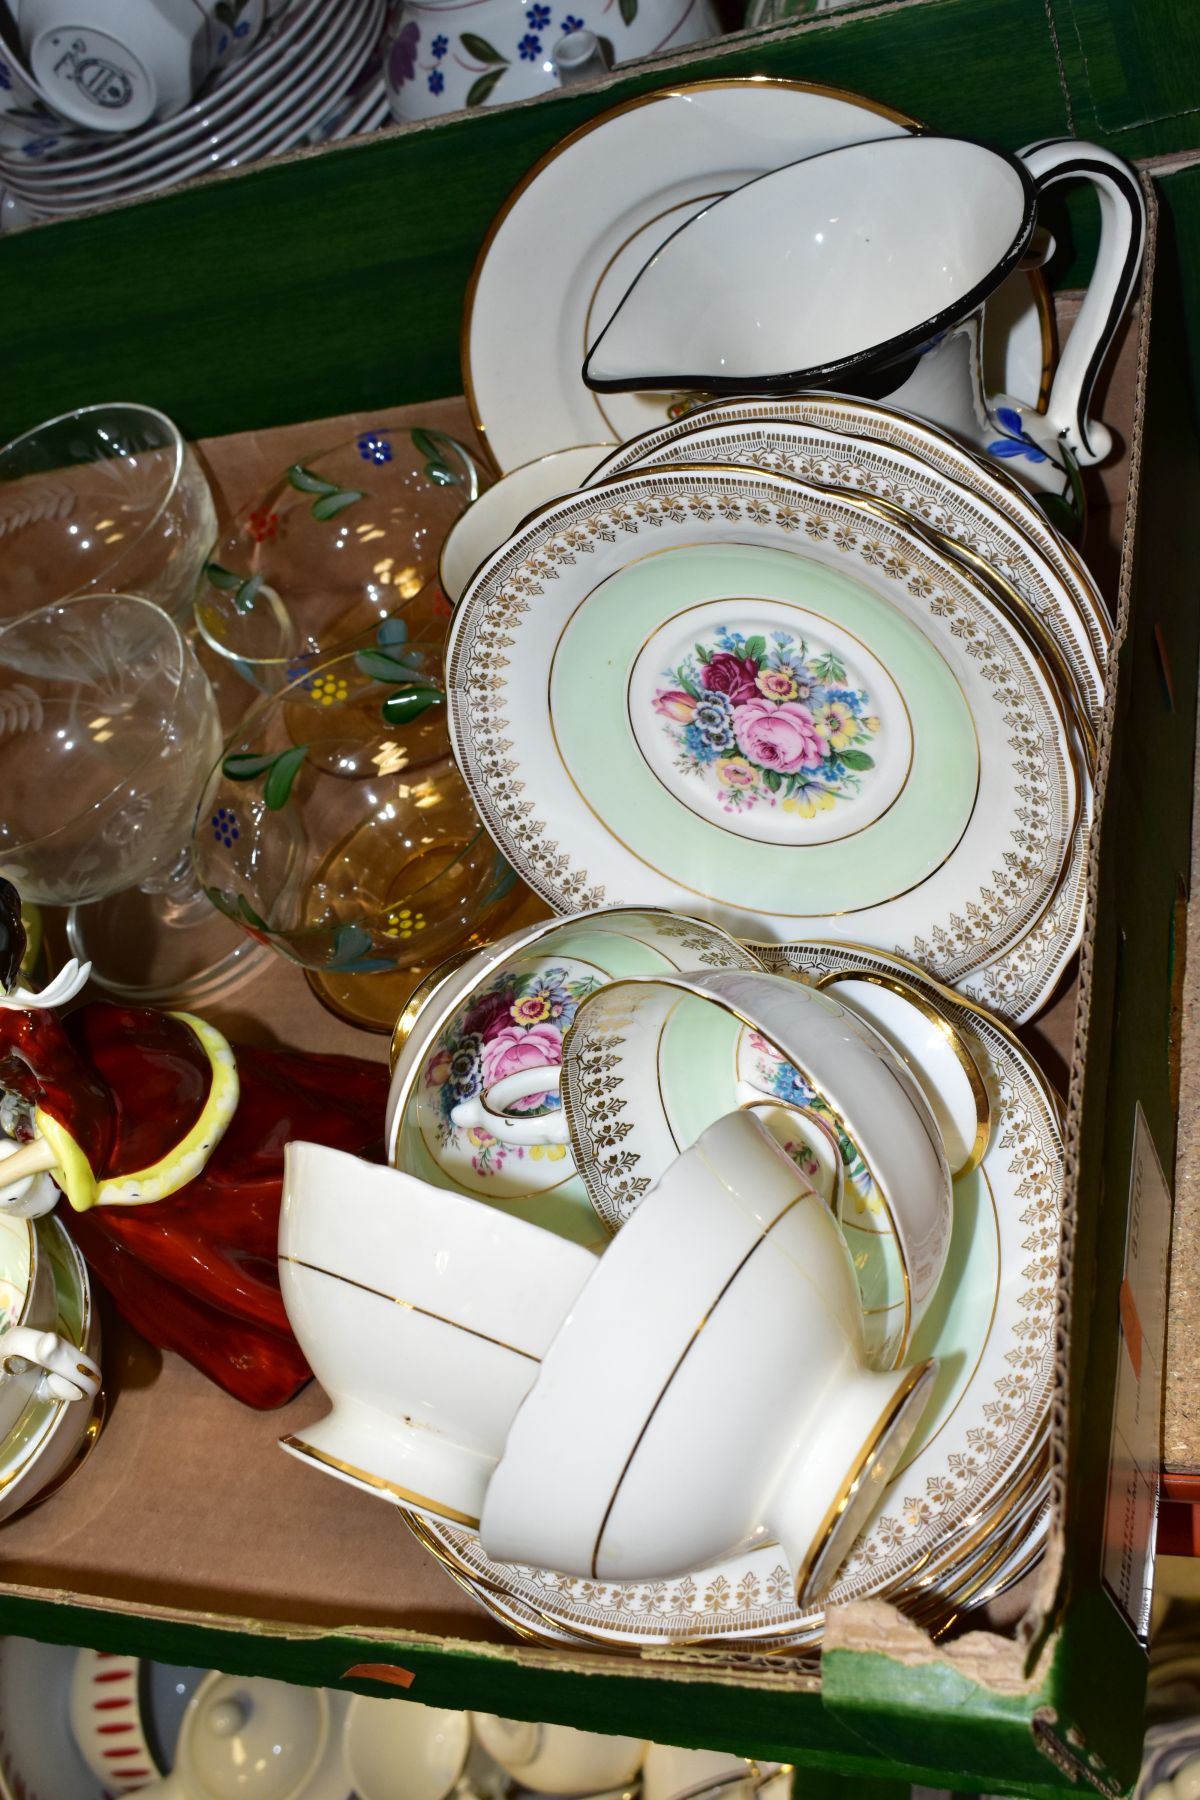 FIVE BOXES OF ART DECO DINNER SERVICE, CERAMICS, GLASS, METALWARES, MINIATURE BOTTLES AND SUNDRY - Image 6 of 16